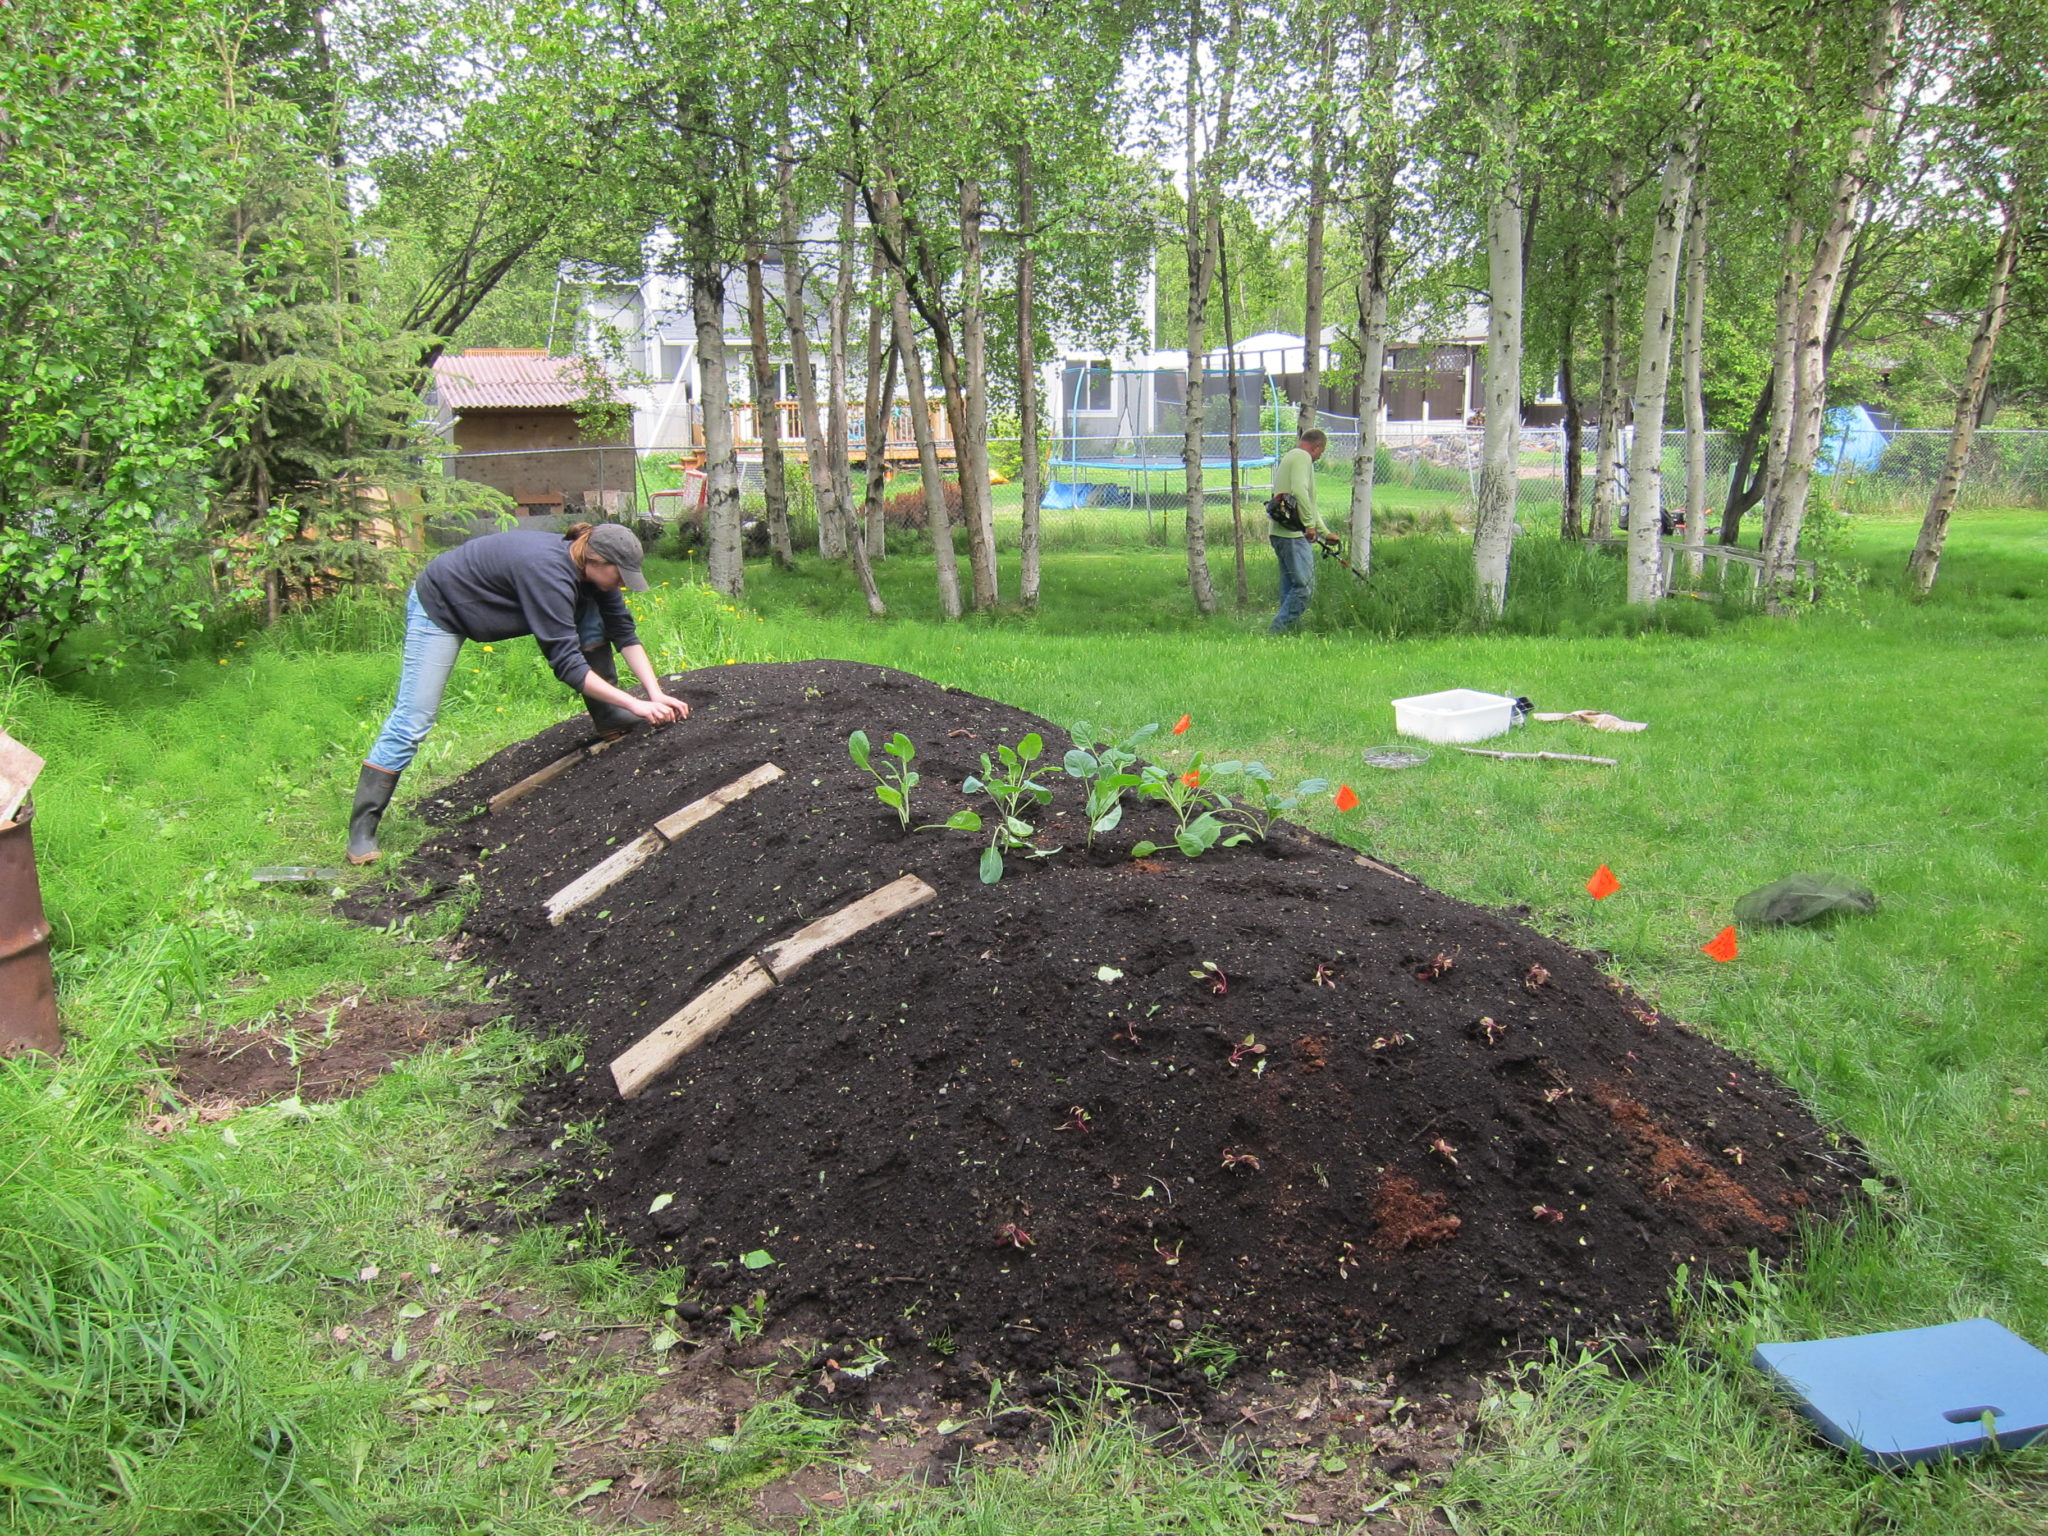 An example of a Hugelkultur being planted. Source: The Alaska Urban Hippie